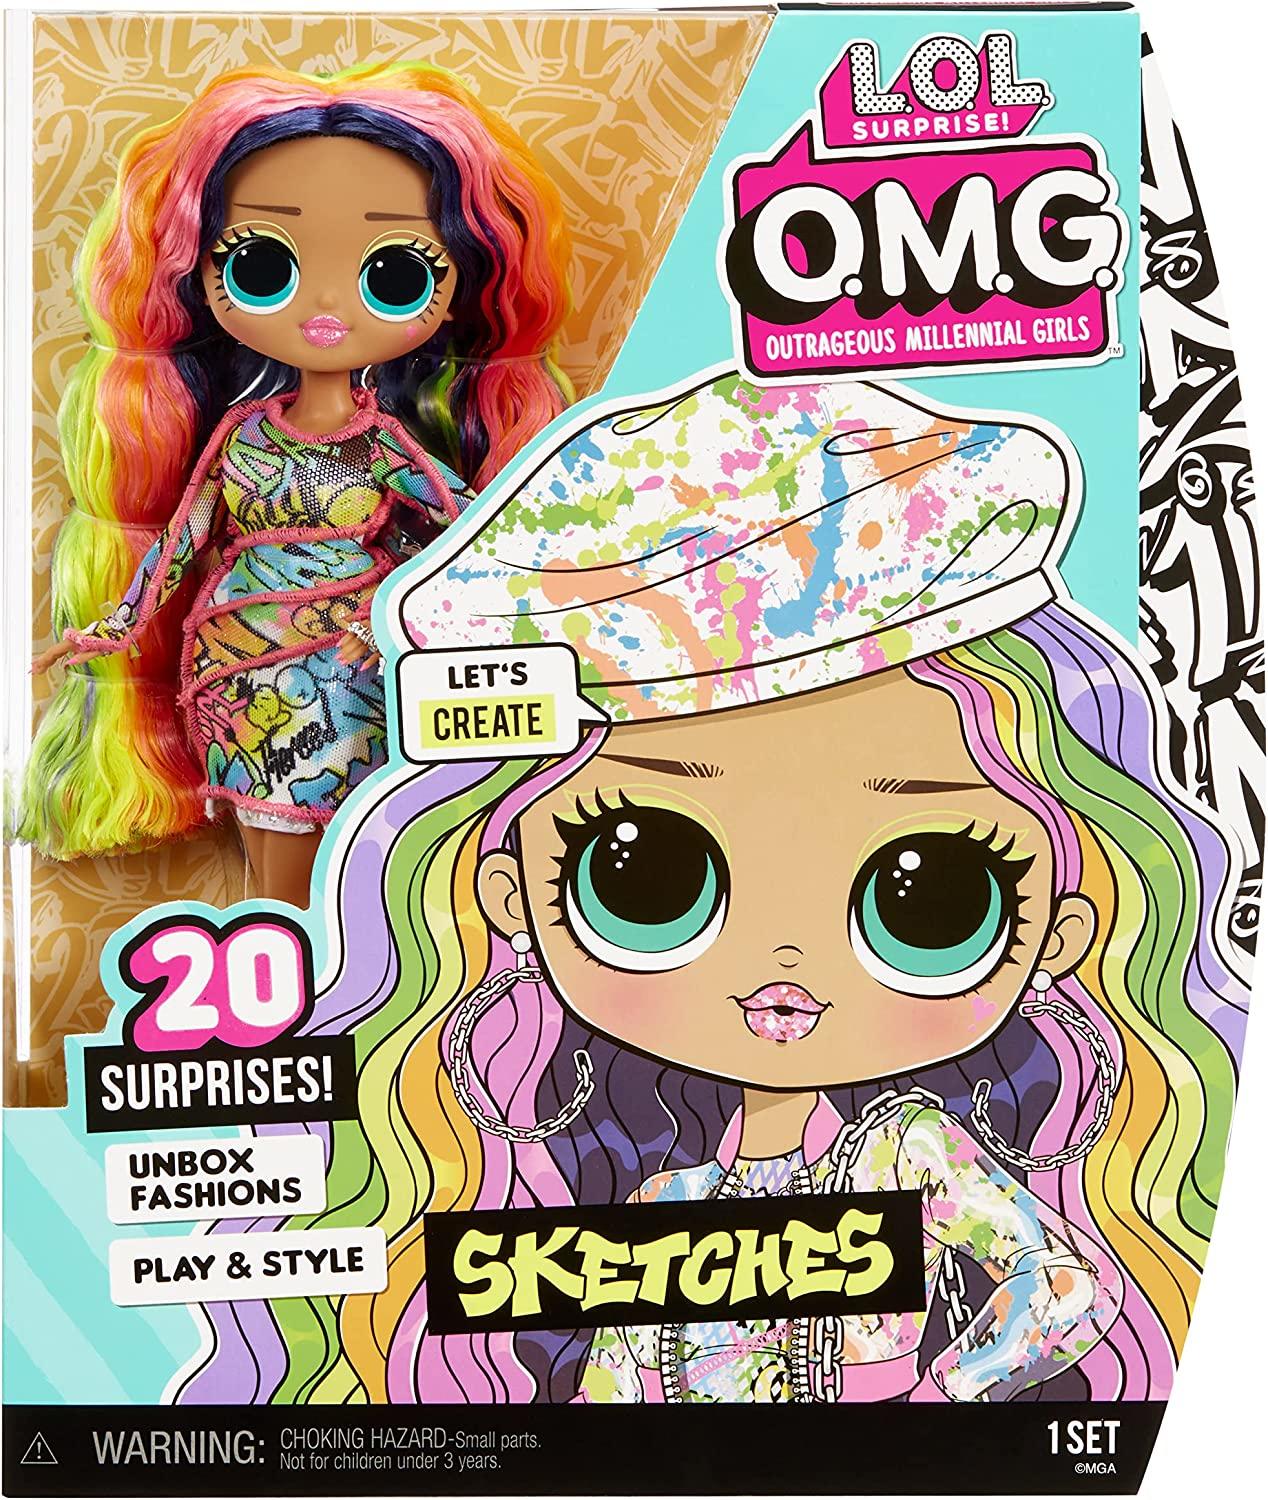 LOL Surprise Tween Babysitting Beach Party with 20 Surprises Including  Color Change Features and 2 Dolls – Great Gift for Kids Ages 4+